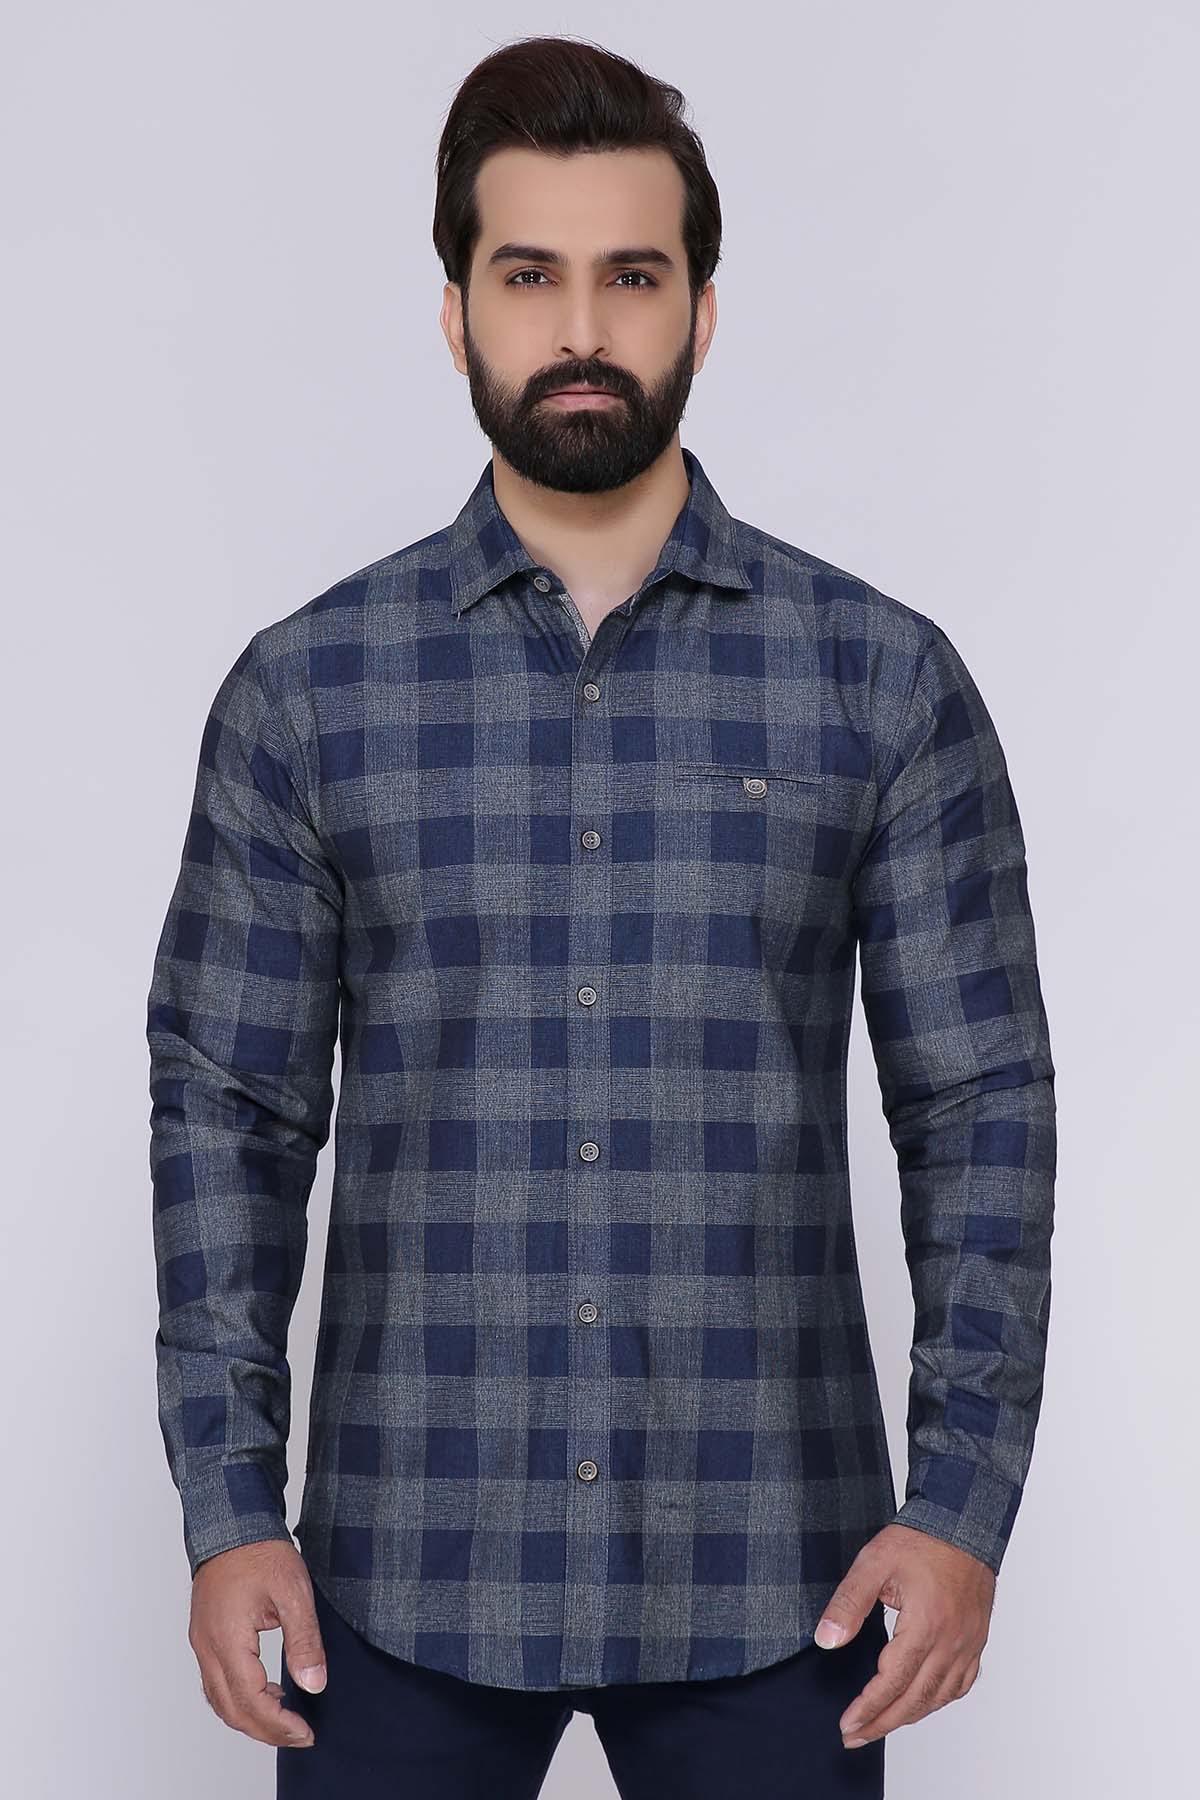 CASUAL SHIRT FULL SLEEVE SLIM FIT BLUE GREY at Charcoal Clothing